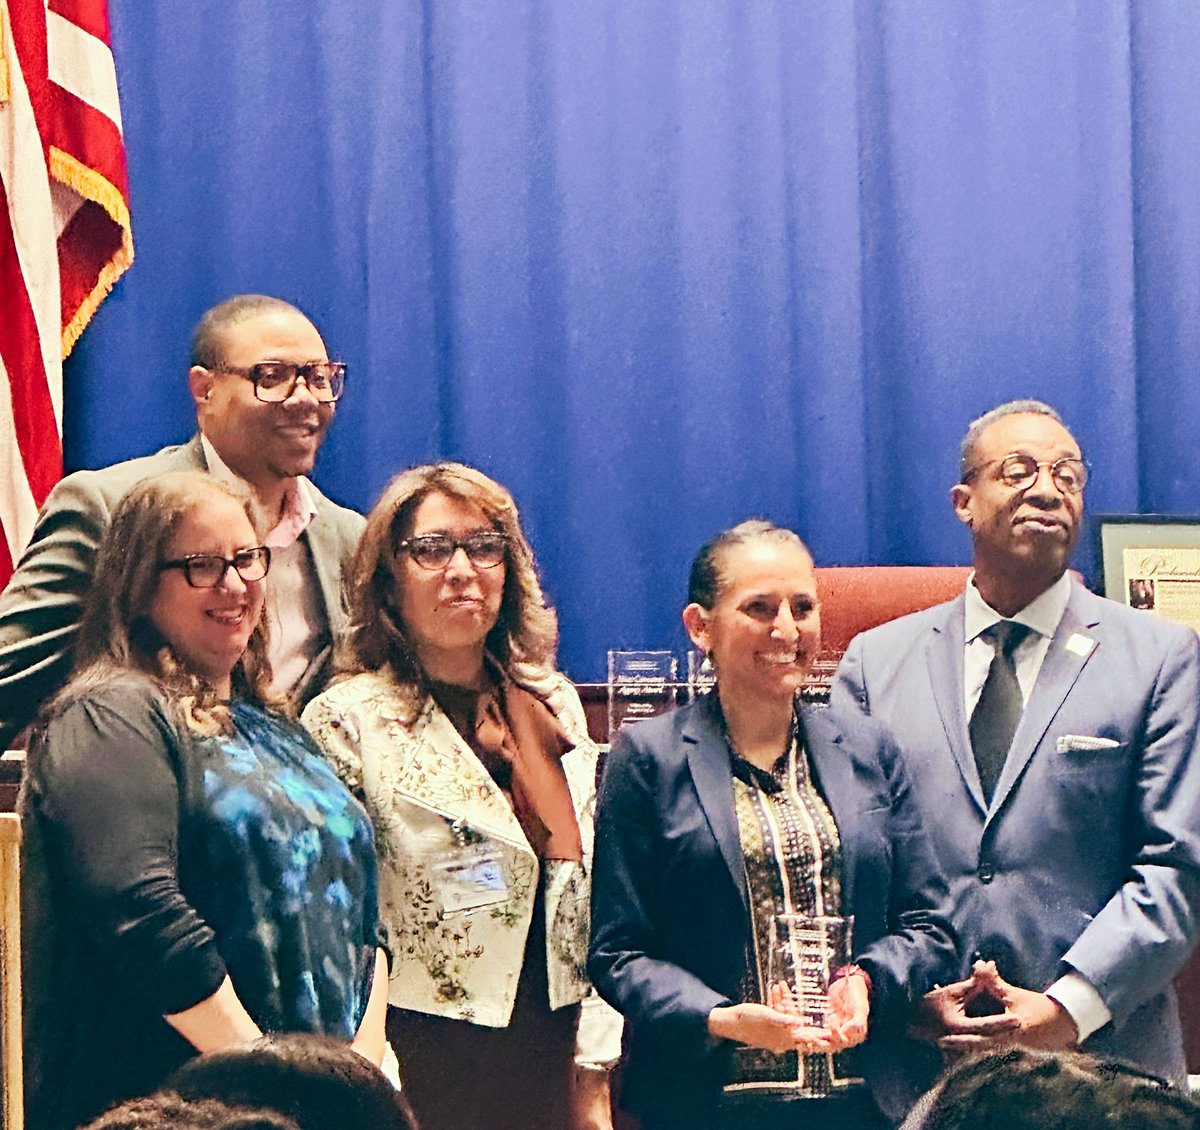 Cheers to 20 years of language access! 🎉 Grateful for the dedication of the many tireless advocates who fought to implement LA and are still pushing to ensure communication across #DC gov’t is inclusive, equitable, and accessible for all. #LanguageAccess #DCValues